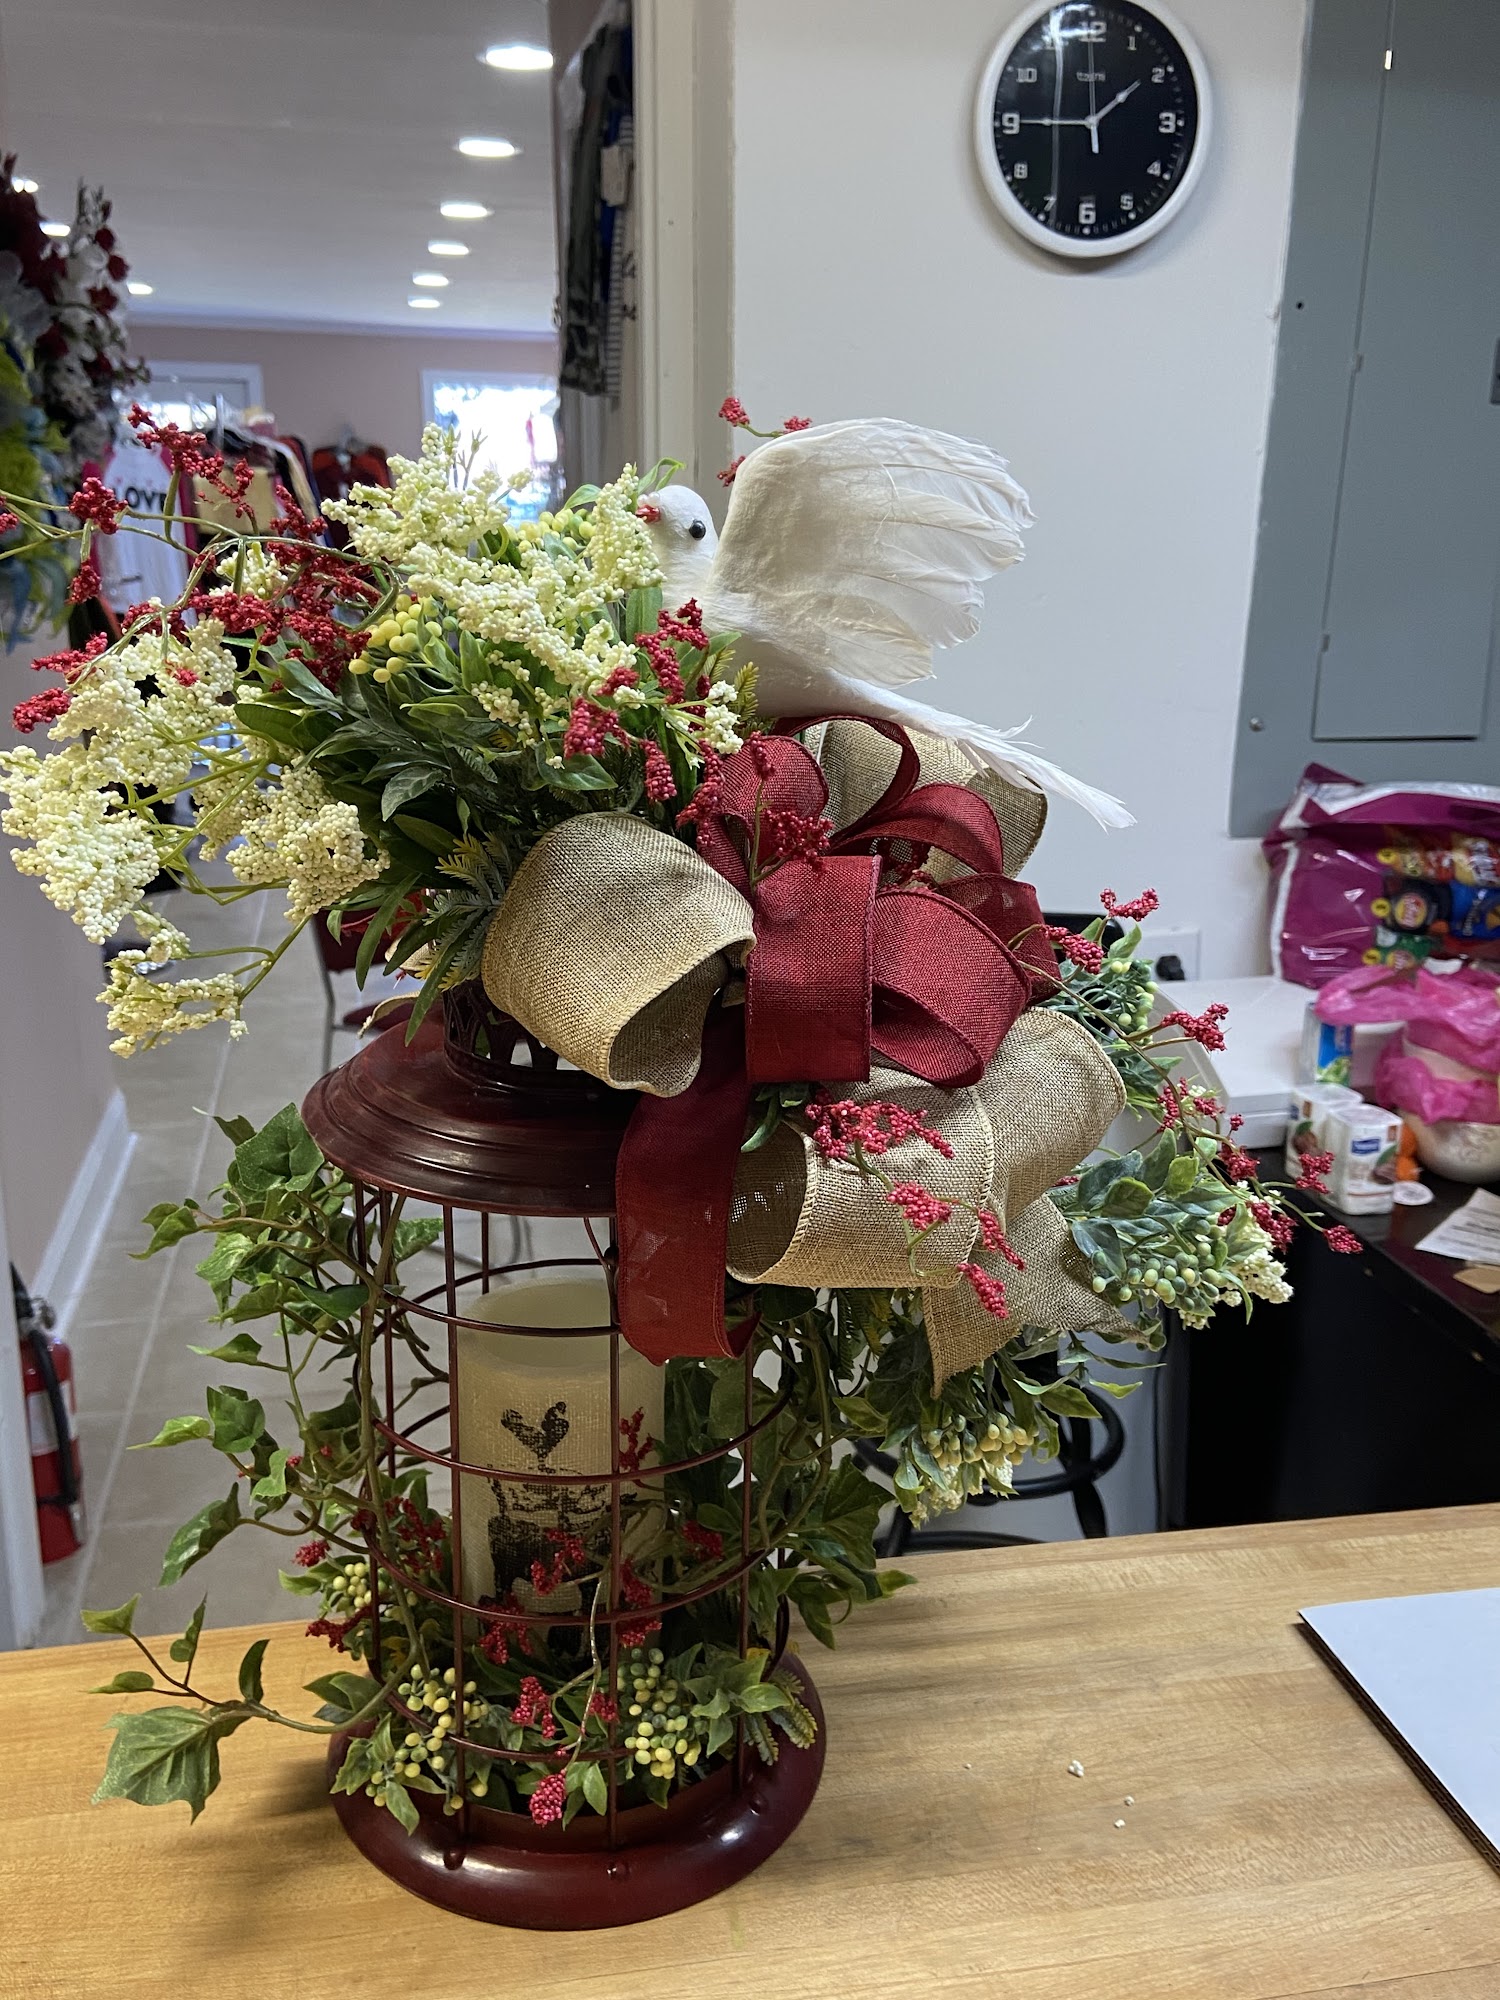 Sheila's Flowers , Gifts and Home decor 1005 N Main St, Tuscumbia Alabama 35674